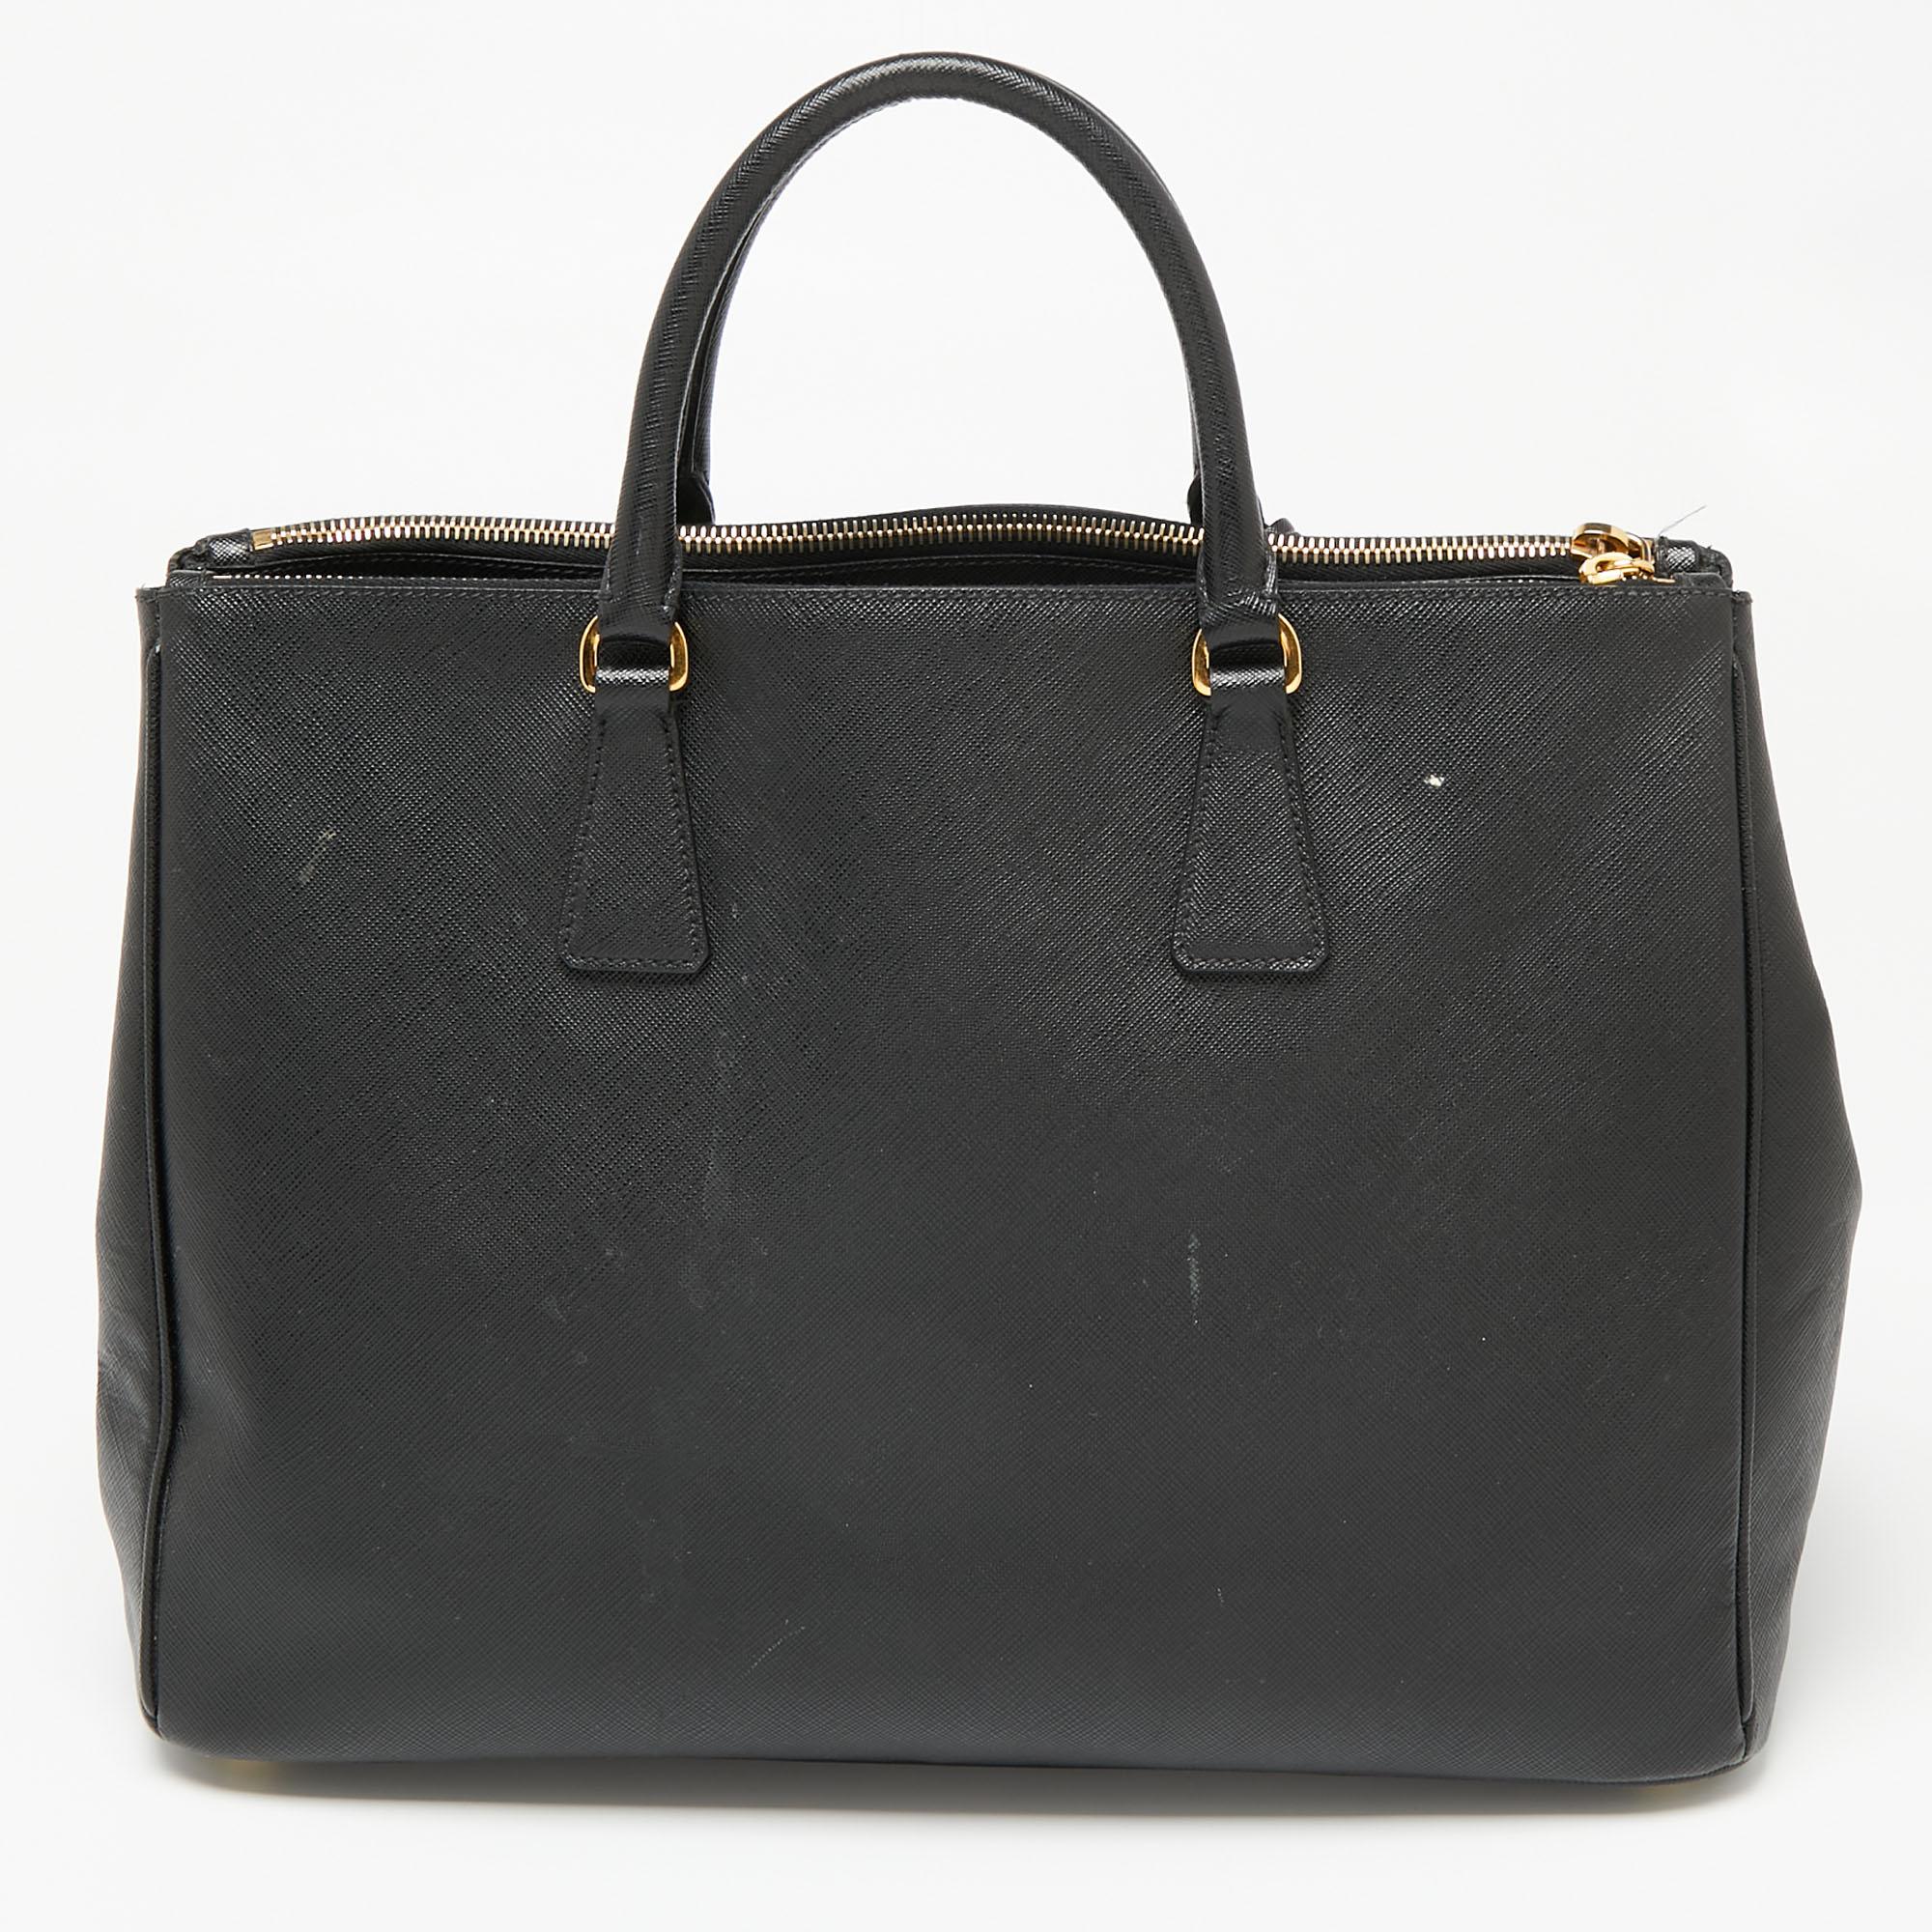 Loved for its classic appeal and functional design, Galleria is one of the most iconic bags from the house of Prada. This beauty in black is crafted from Saffiano leather and is equipped with two top handles, the brand logo at the front, and a lined